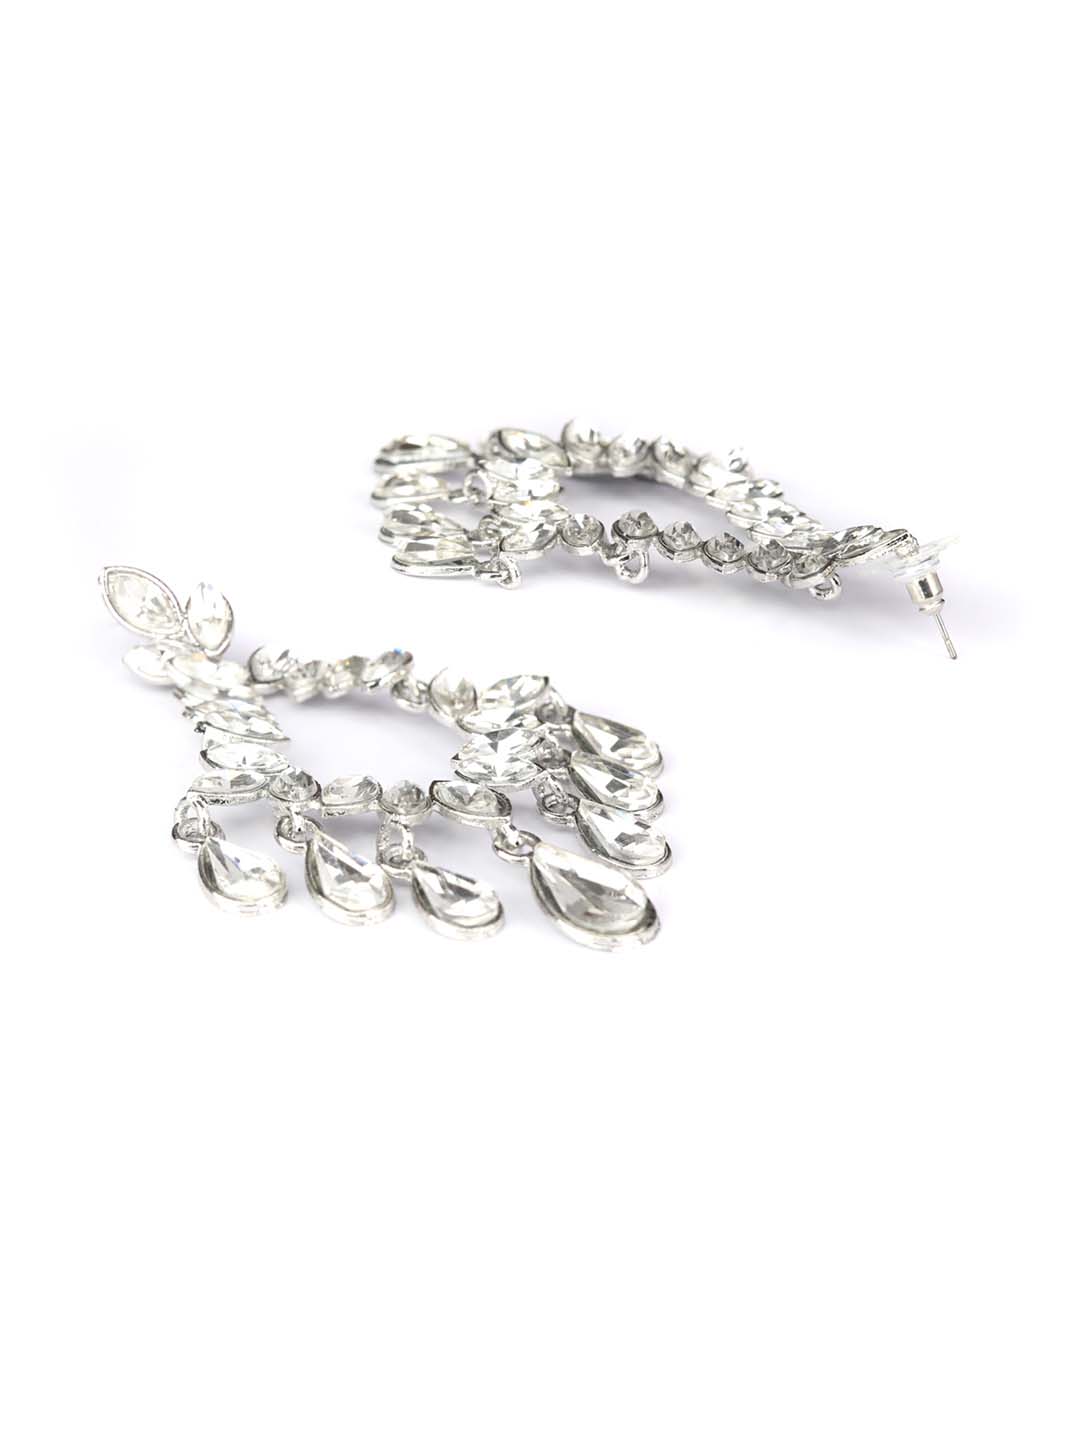 Stone Studded Silver Plated Drop Earring